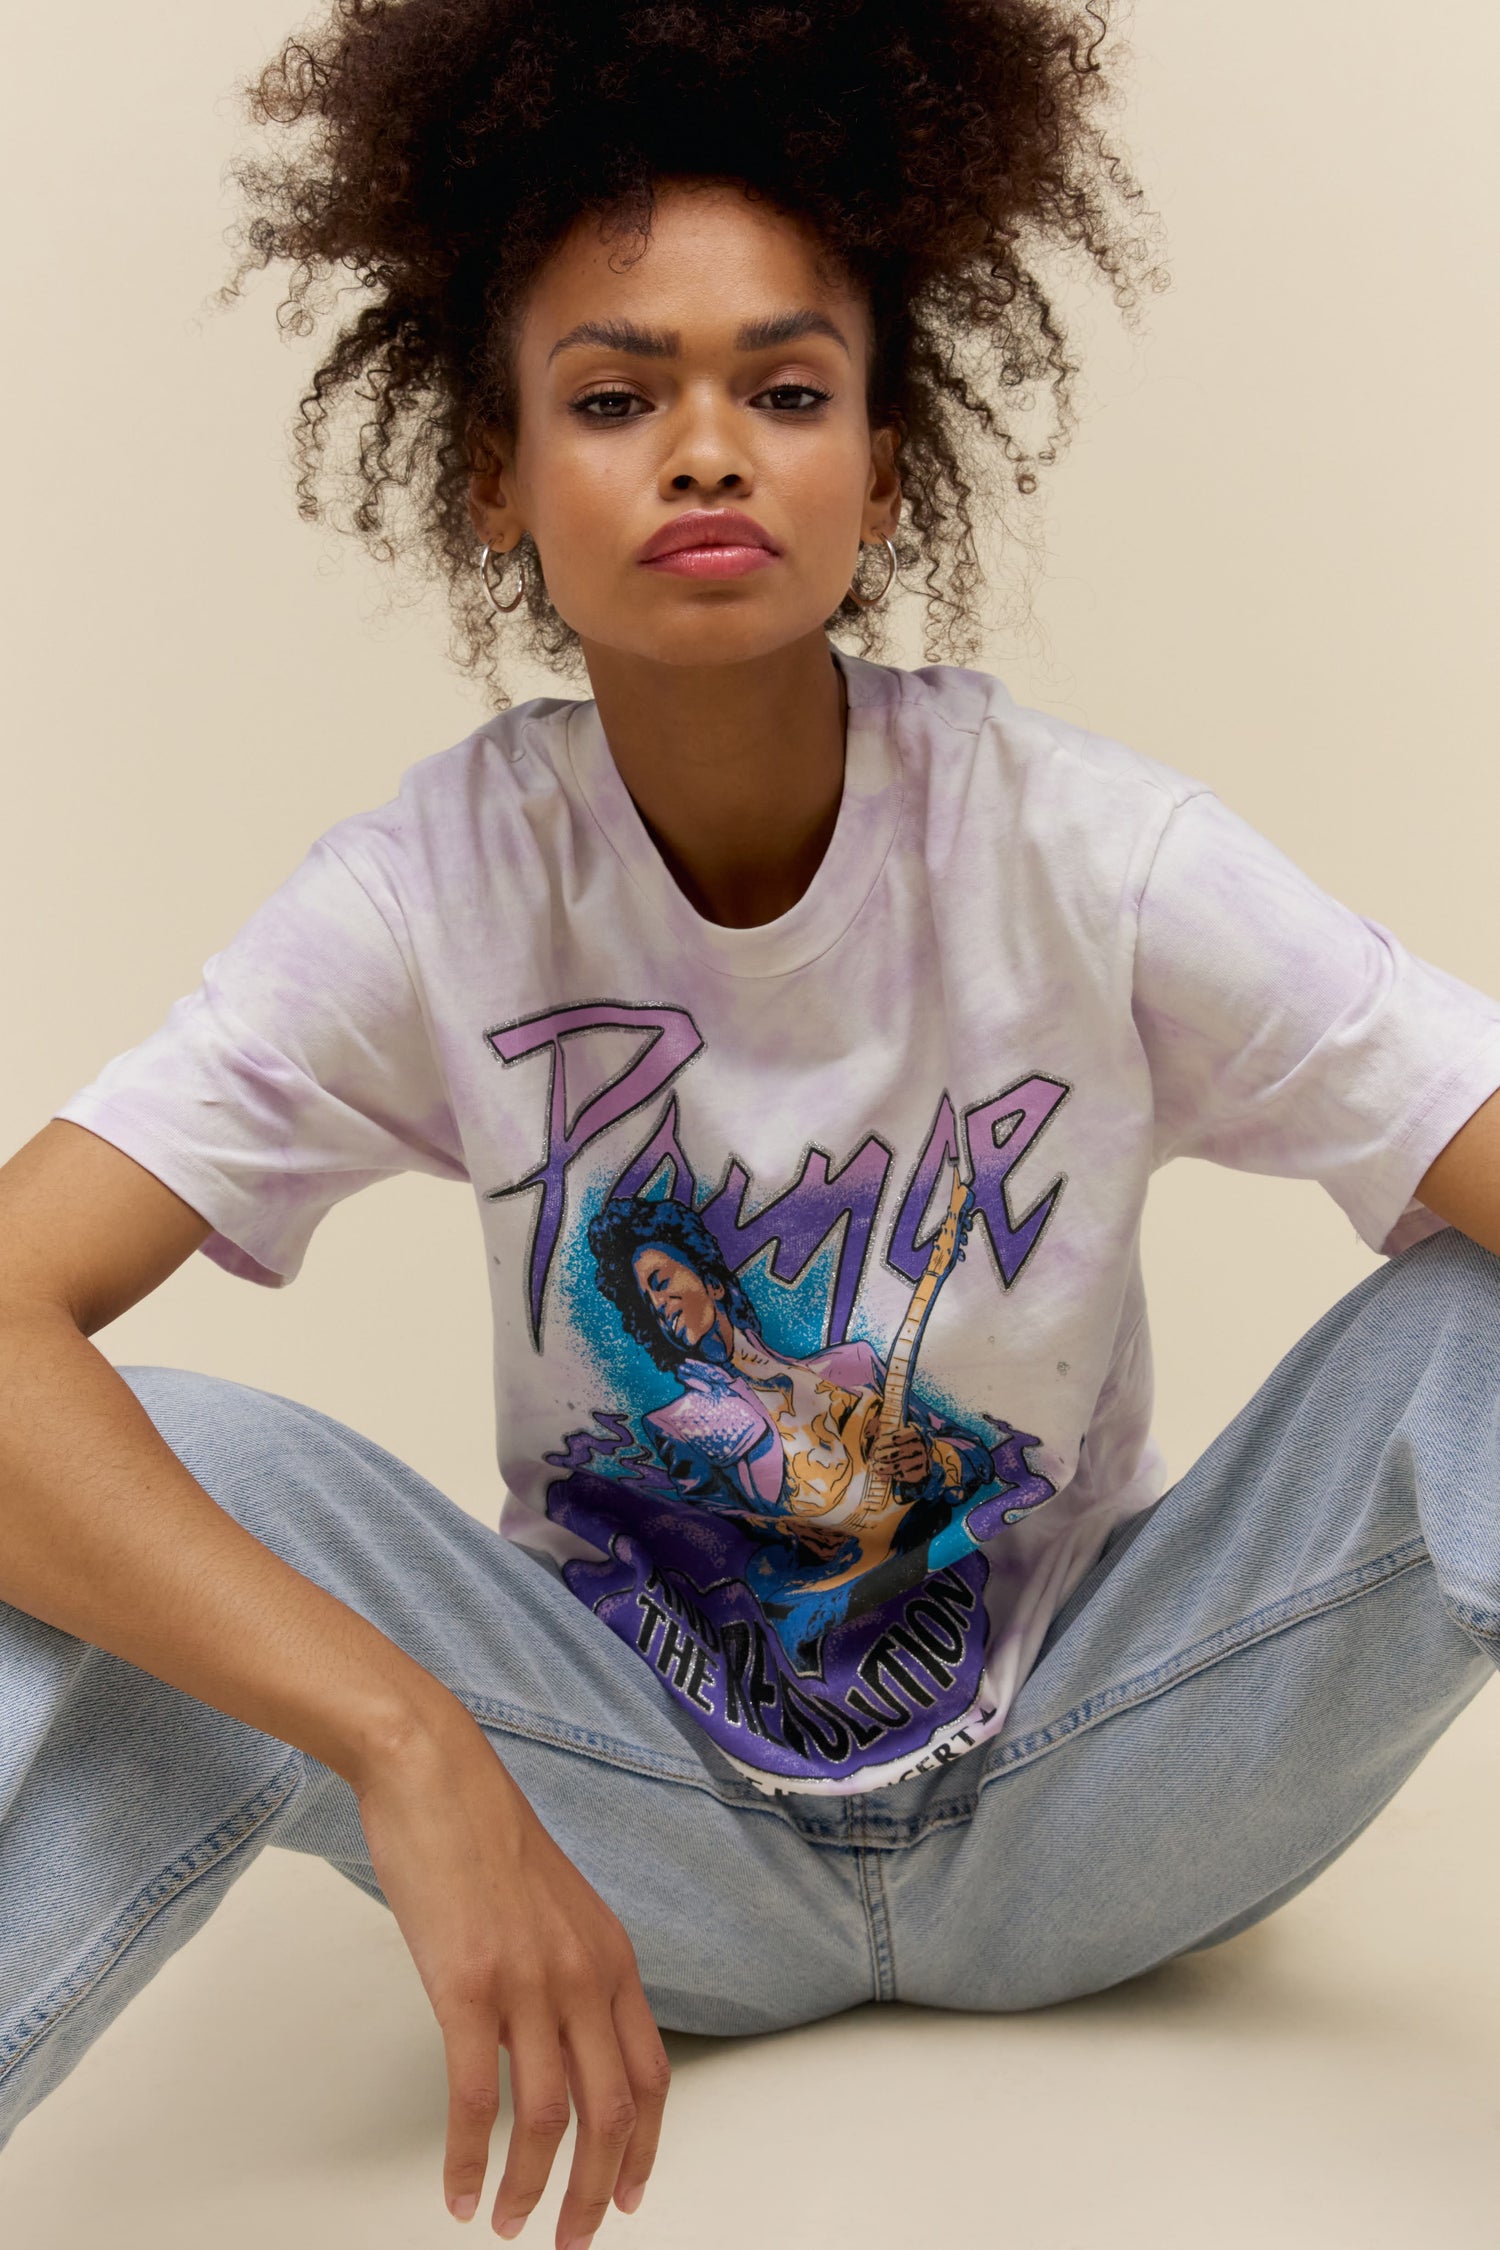 A model featuring a white tee designed with a photo of Prince performing at a concert.